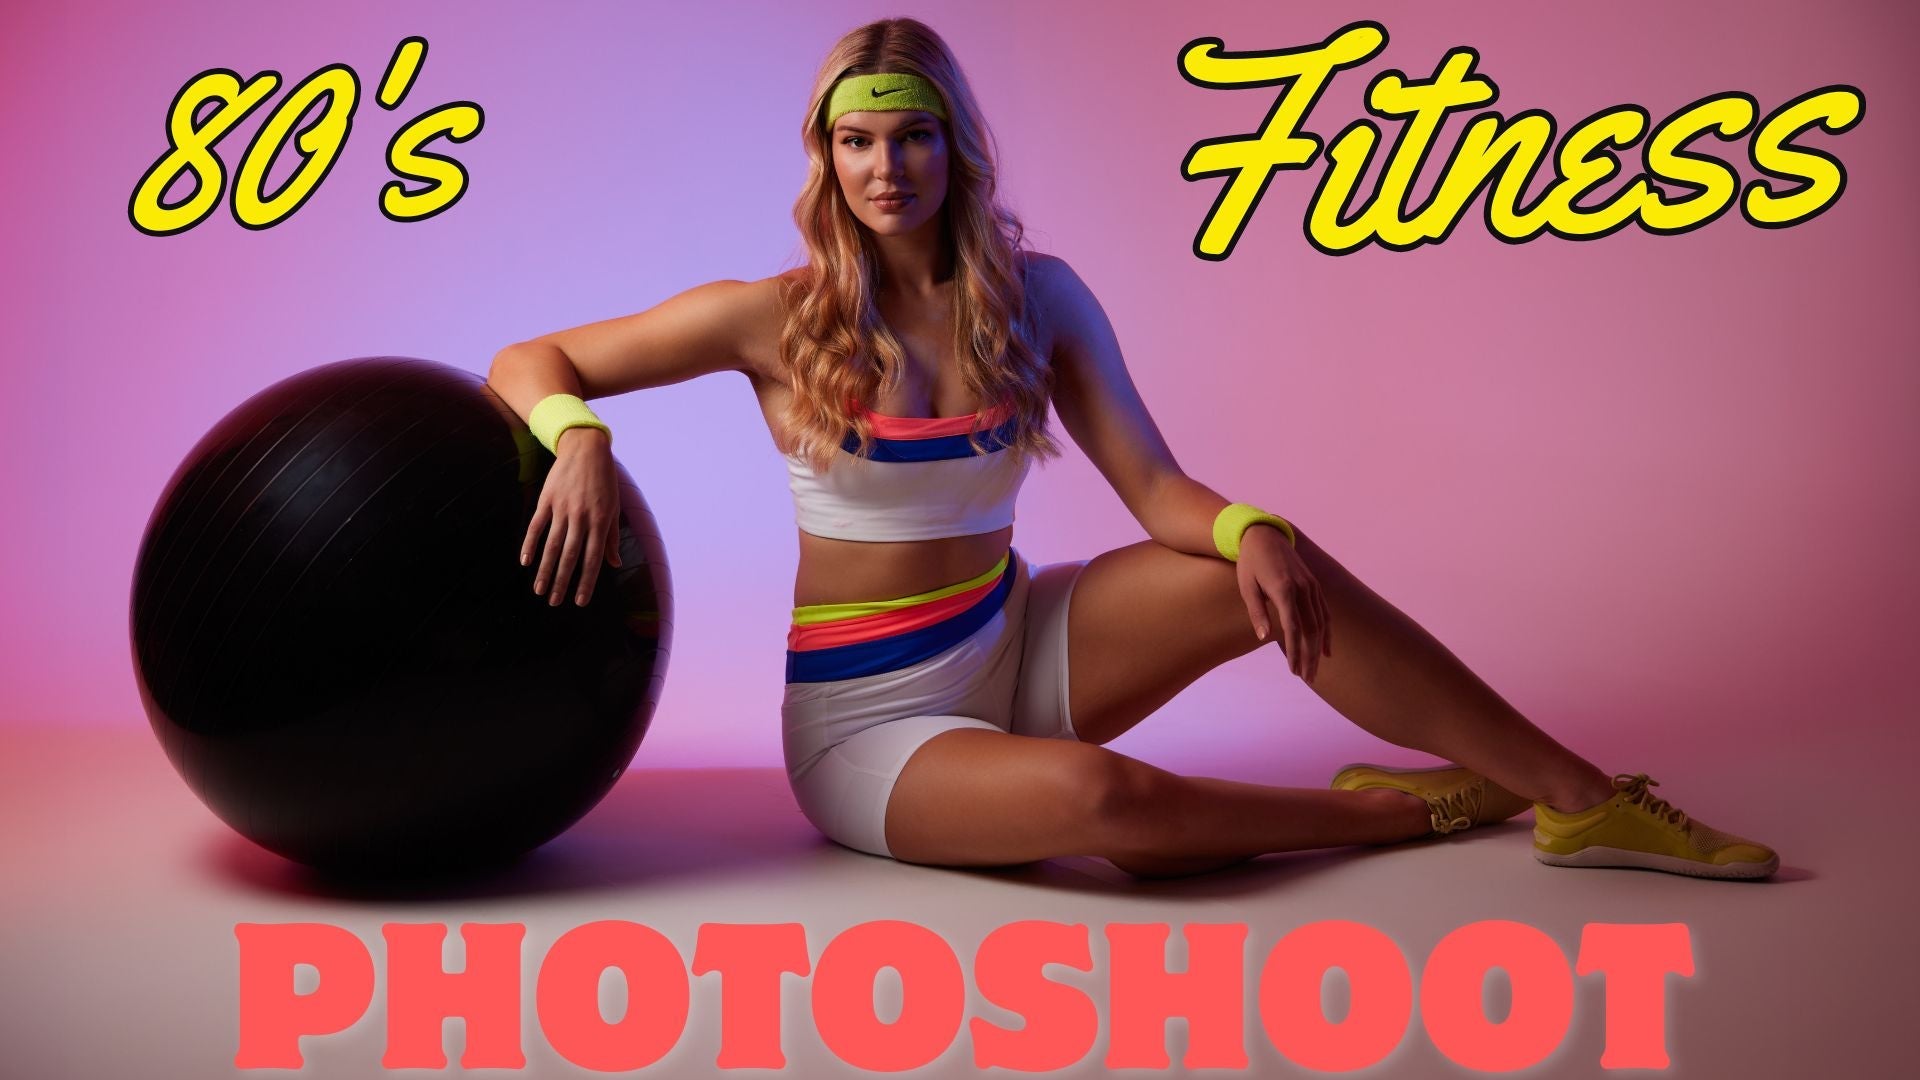 80's fitness photoshoot with model in retro workout gear against pink background.